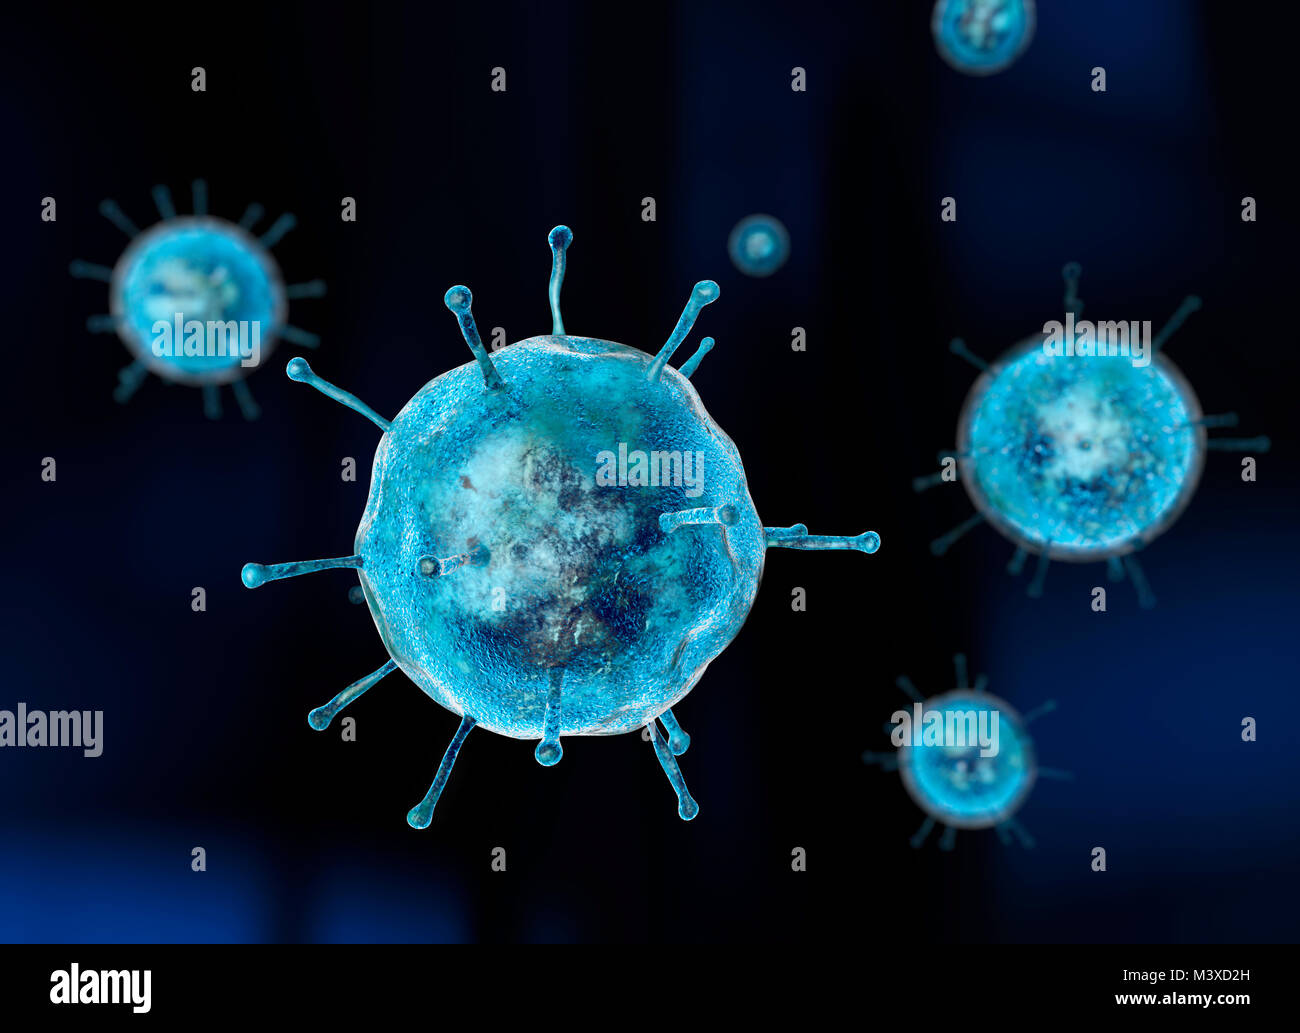 Virus, flu, view of a virus under a microscope, infectious disease Stock Photo